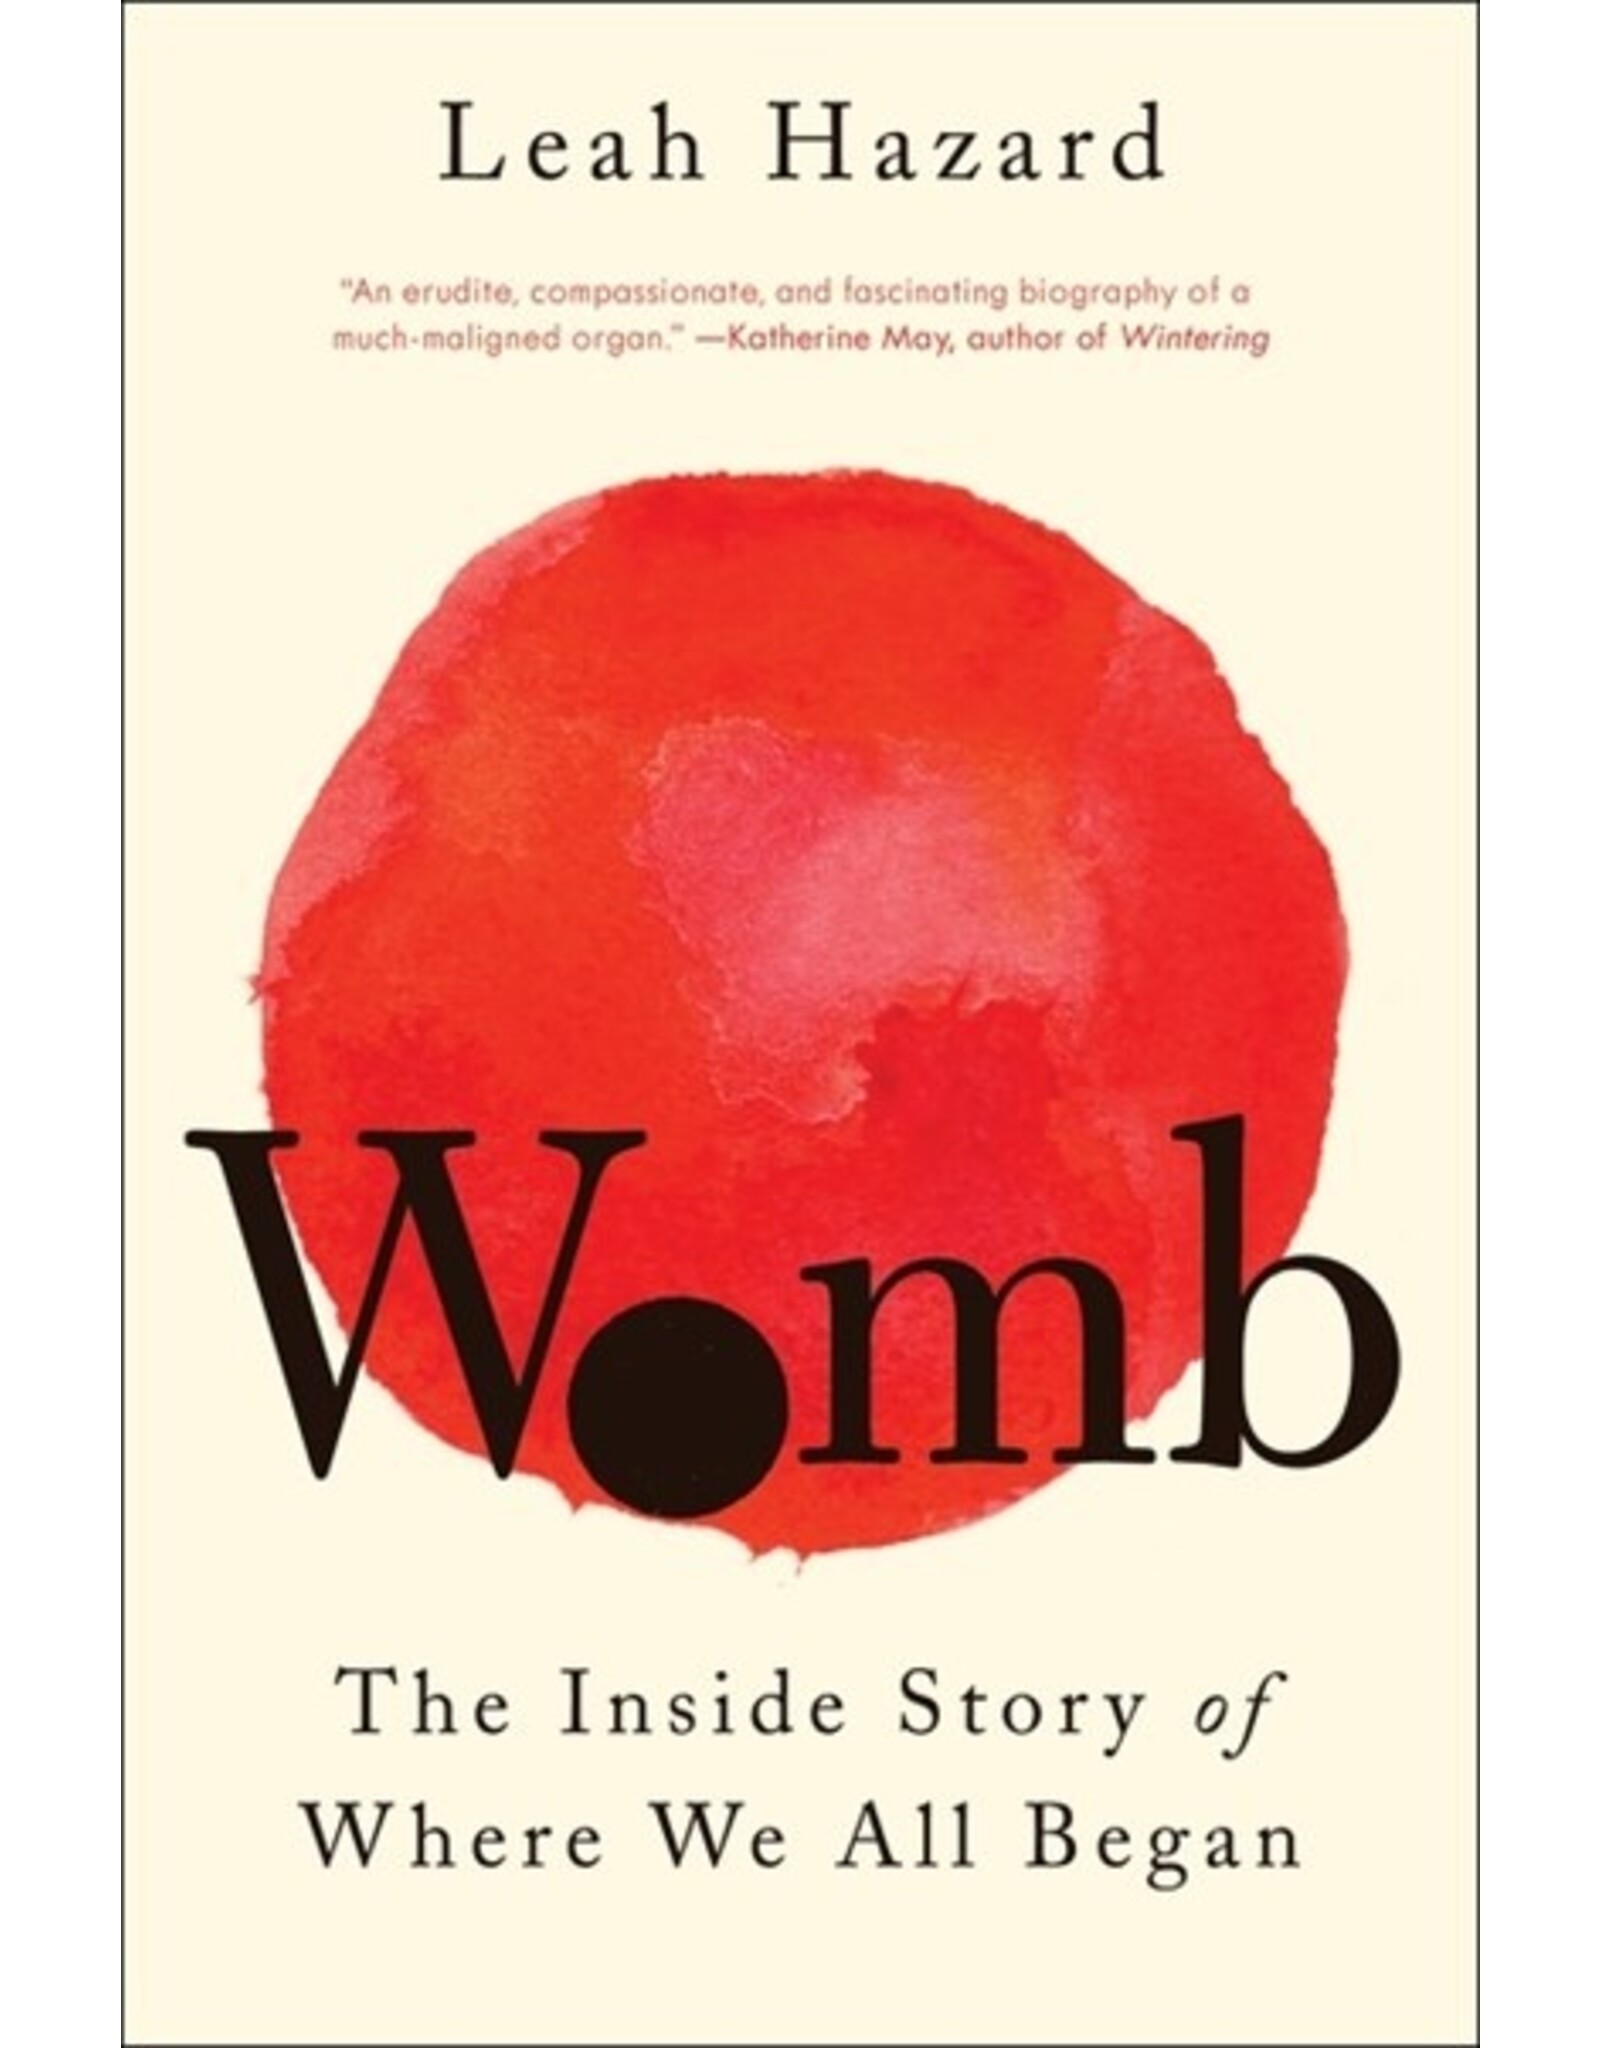 Books Womb: The Inside Story of Where We All Began by Leah Hazard